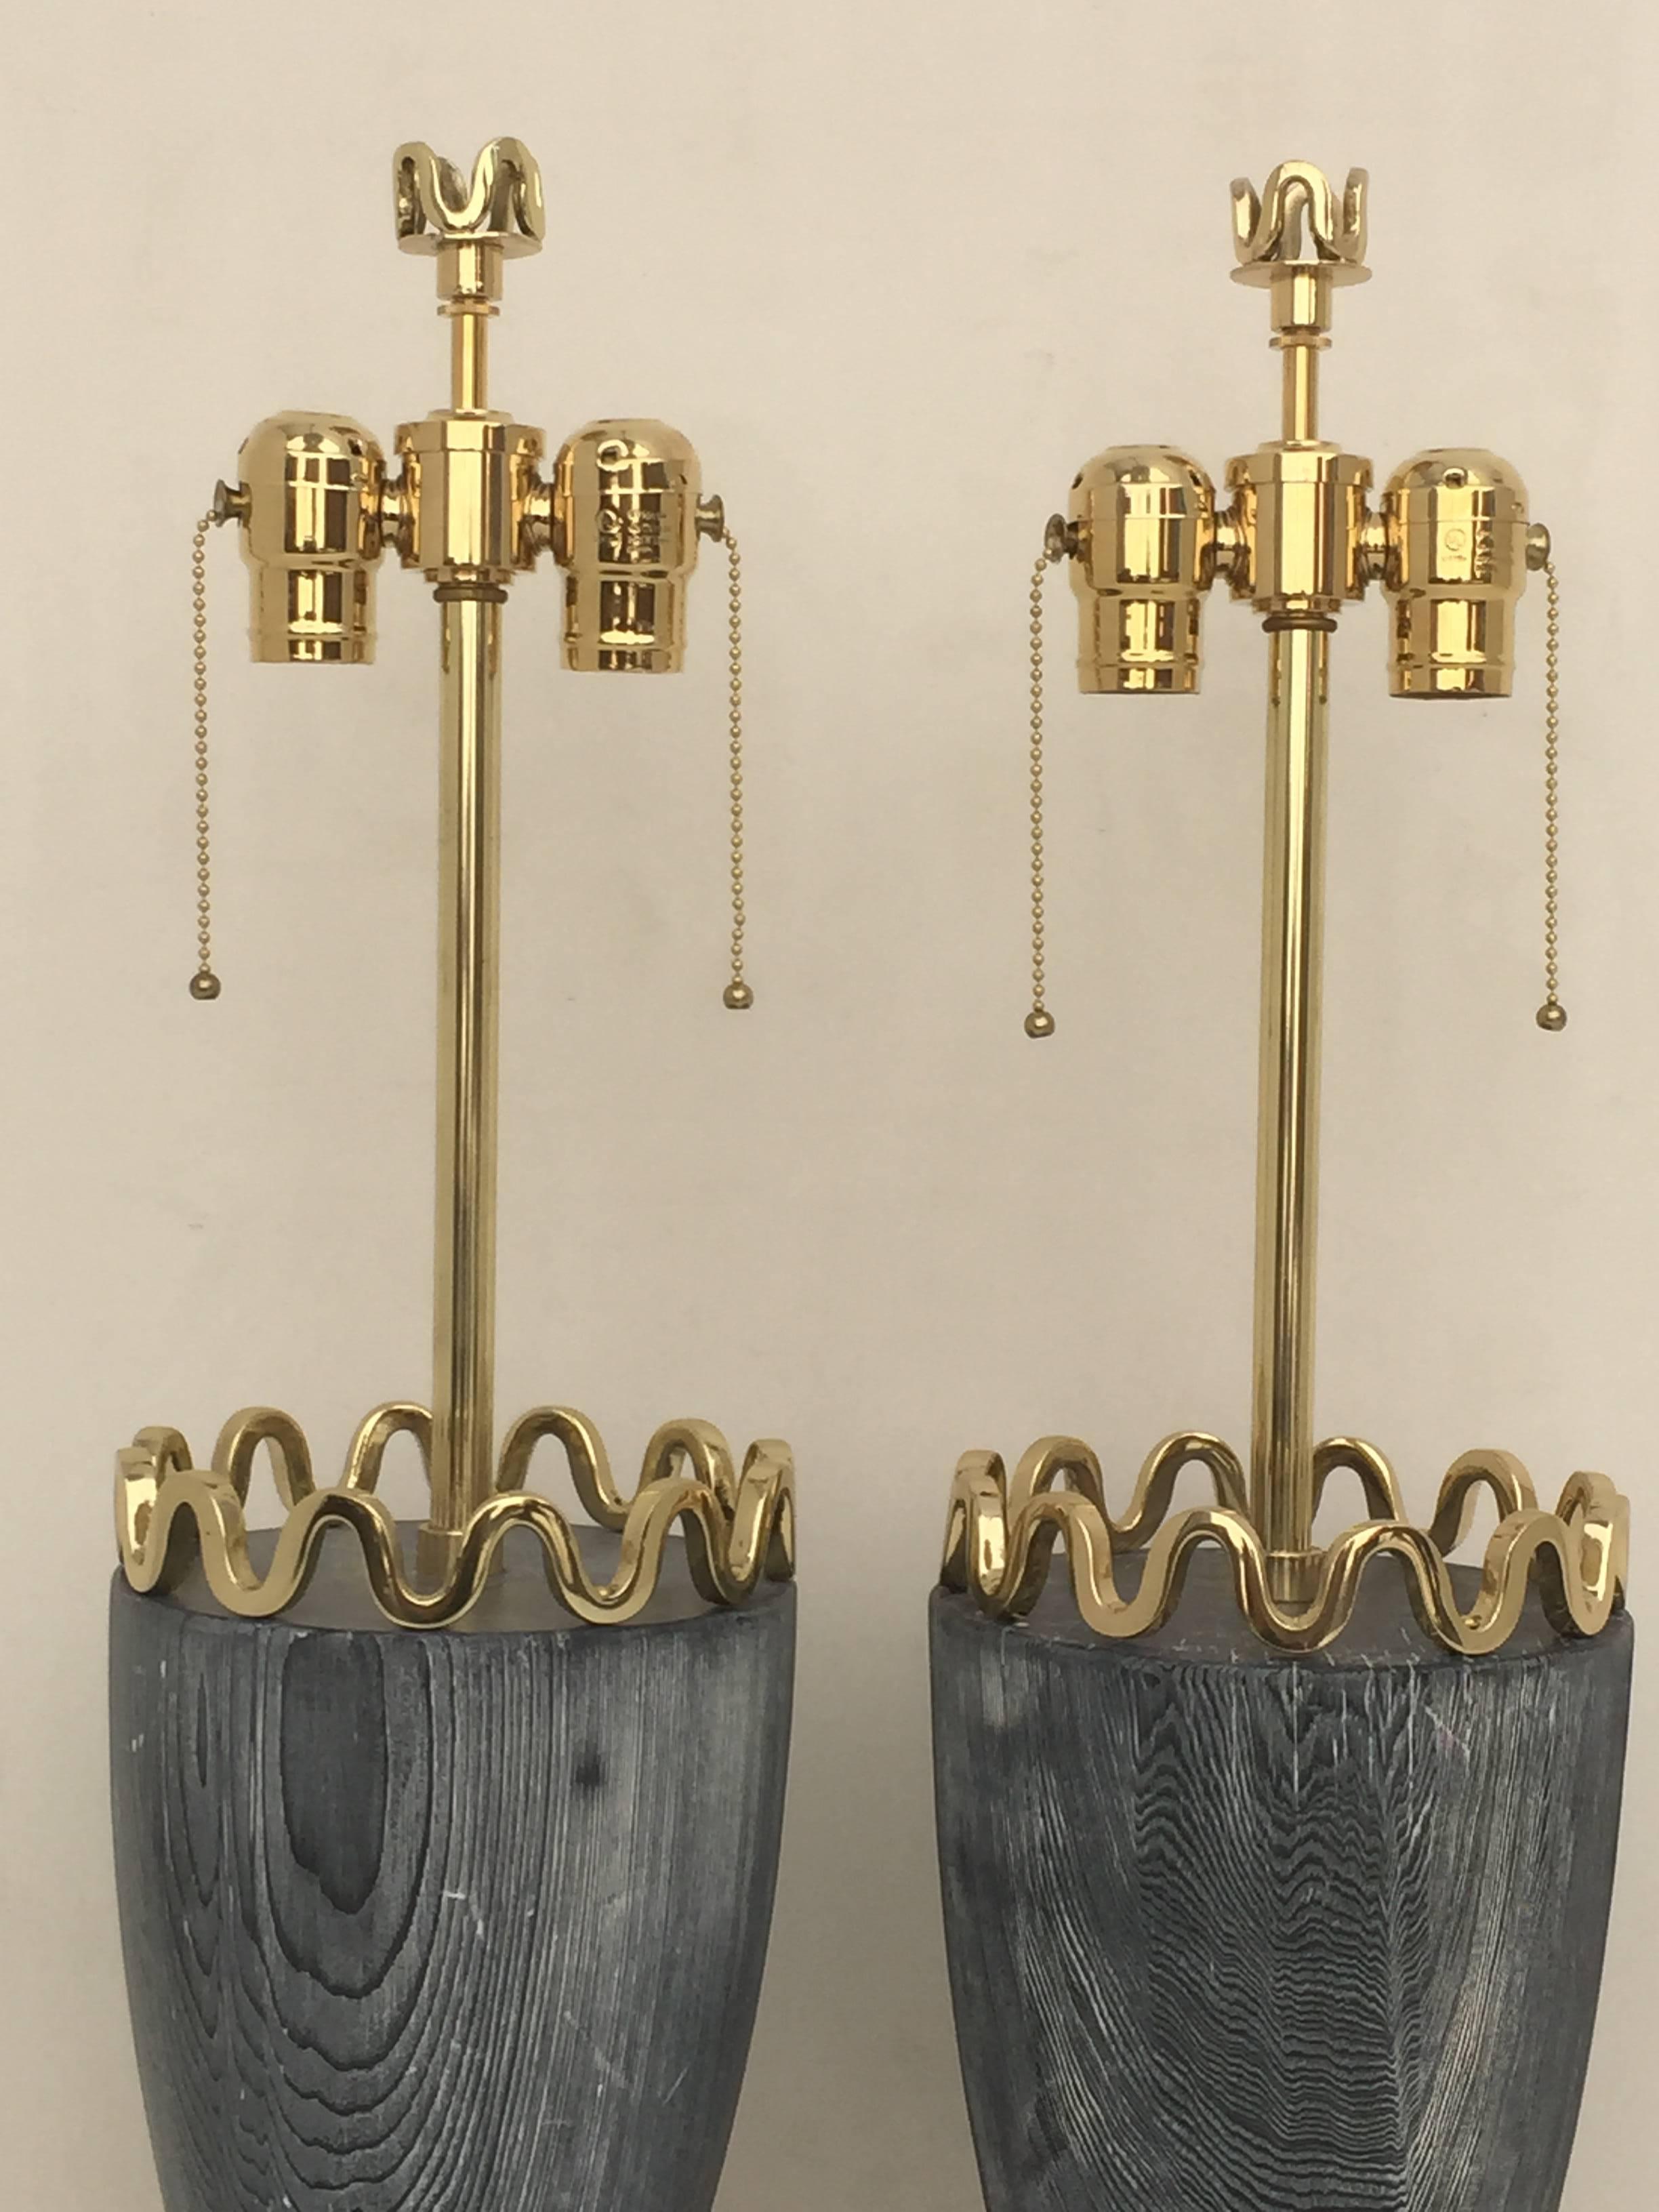 James Mont cerused redwood and polished brass lamps.